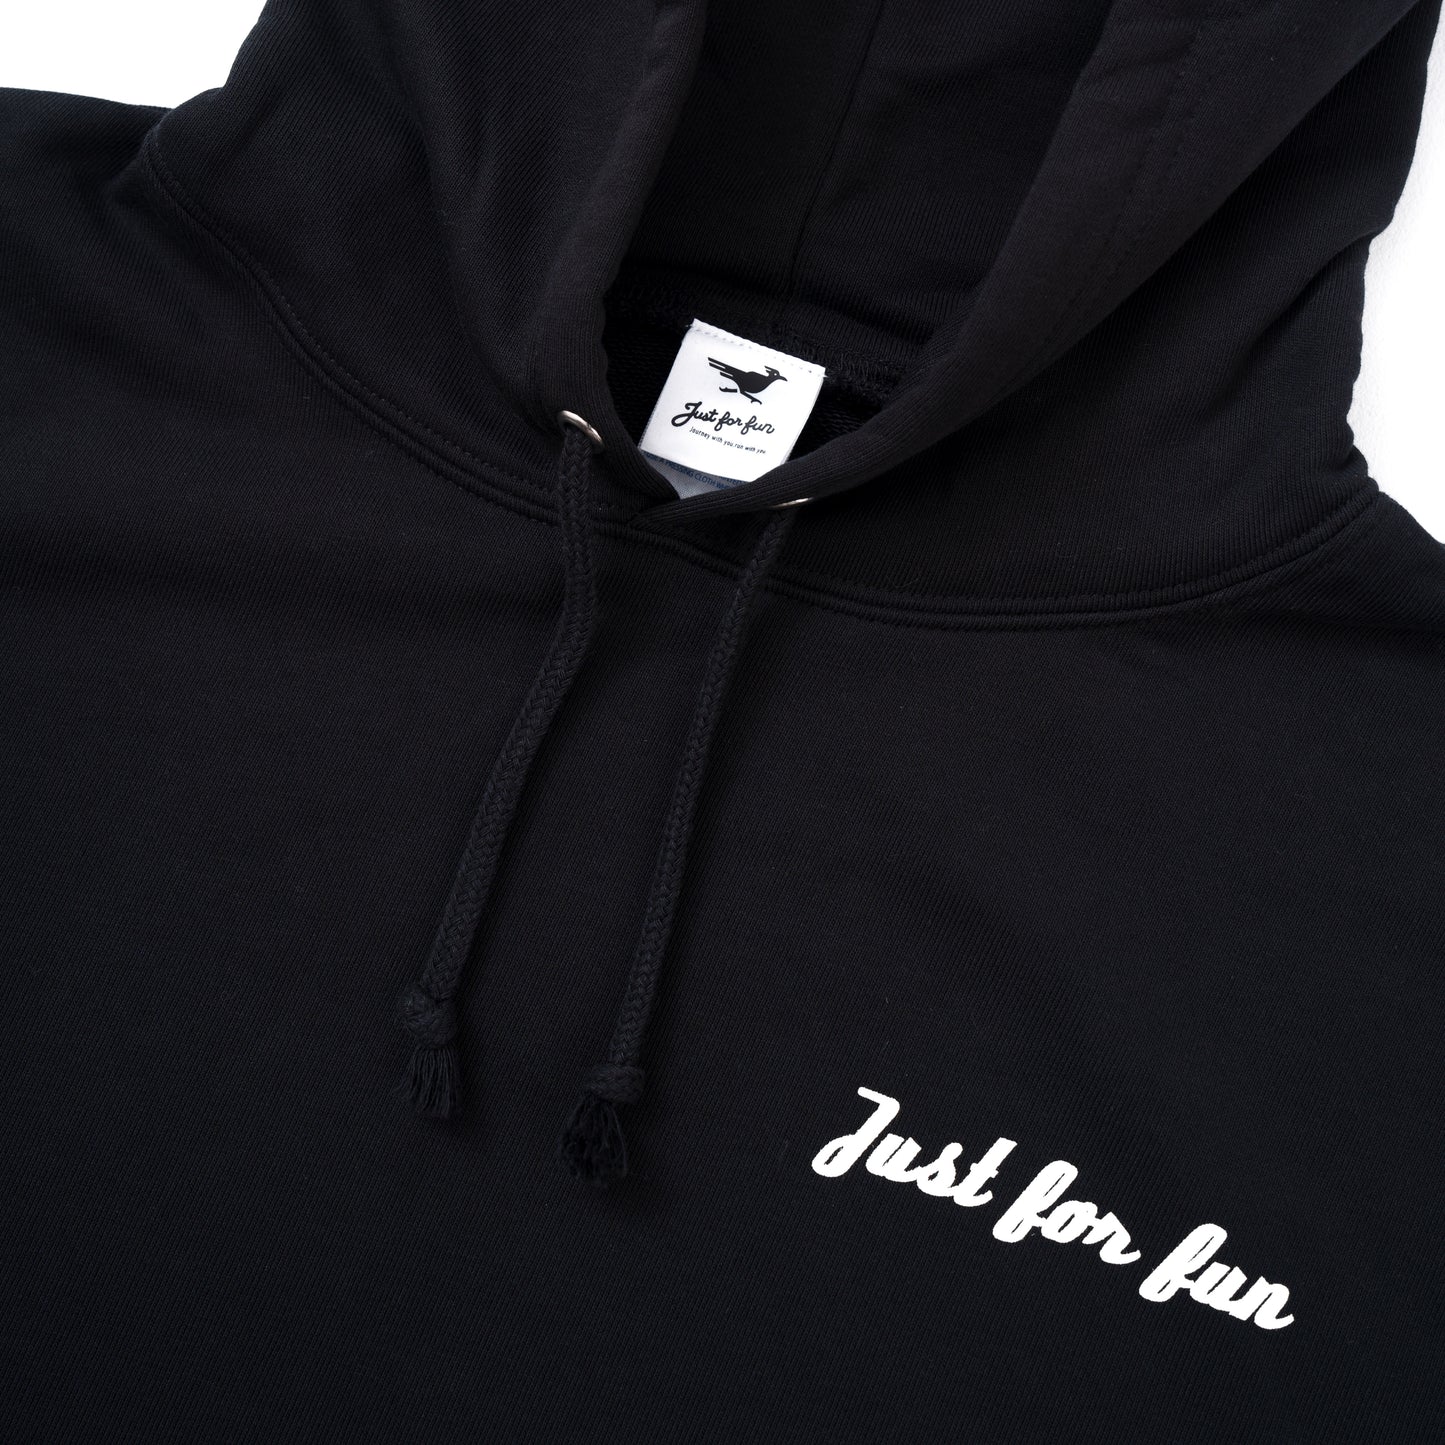 JUST FOR FUNパーカー(black)